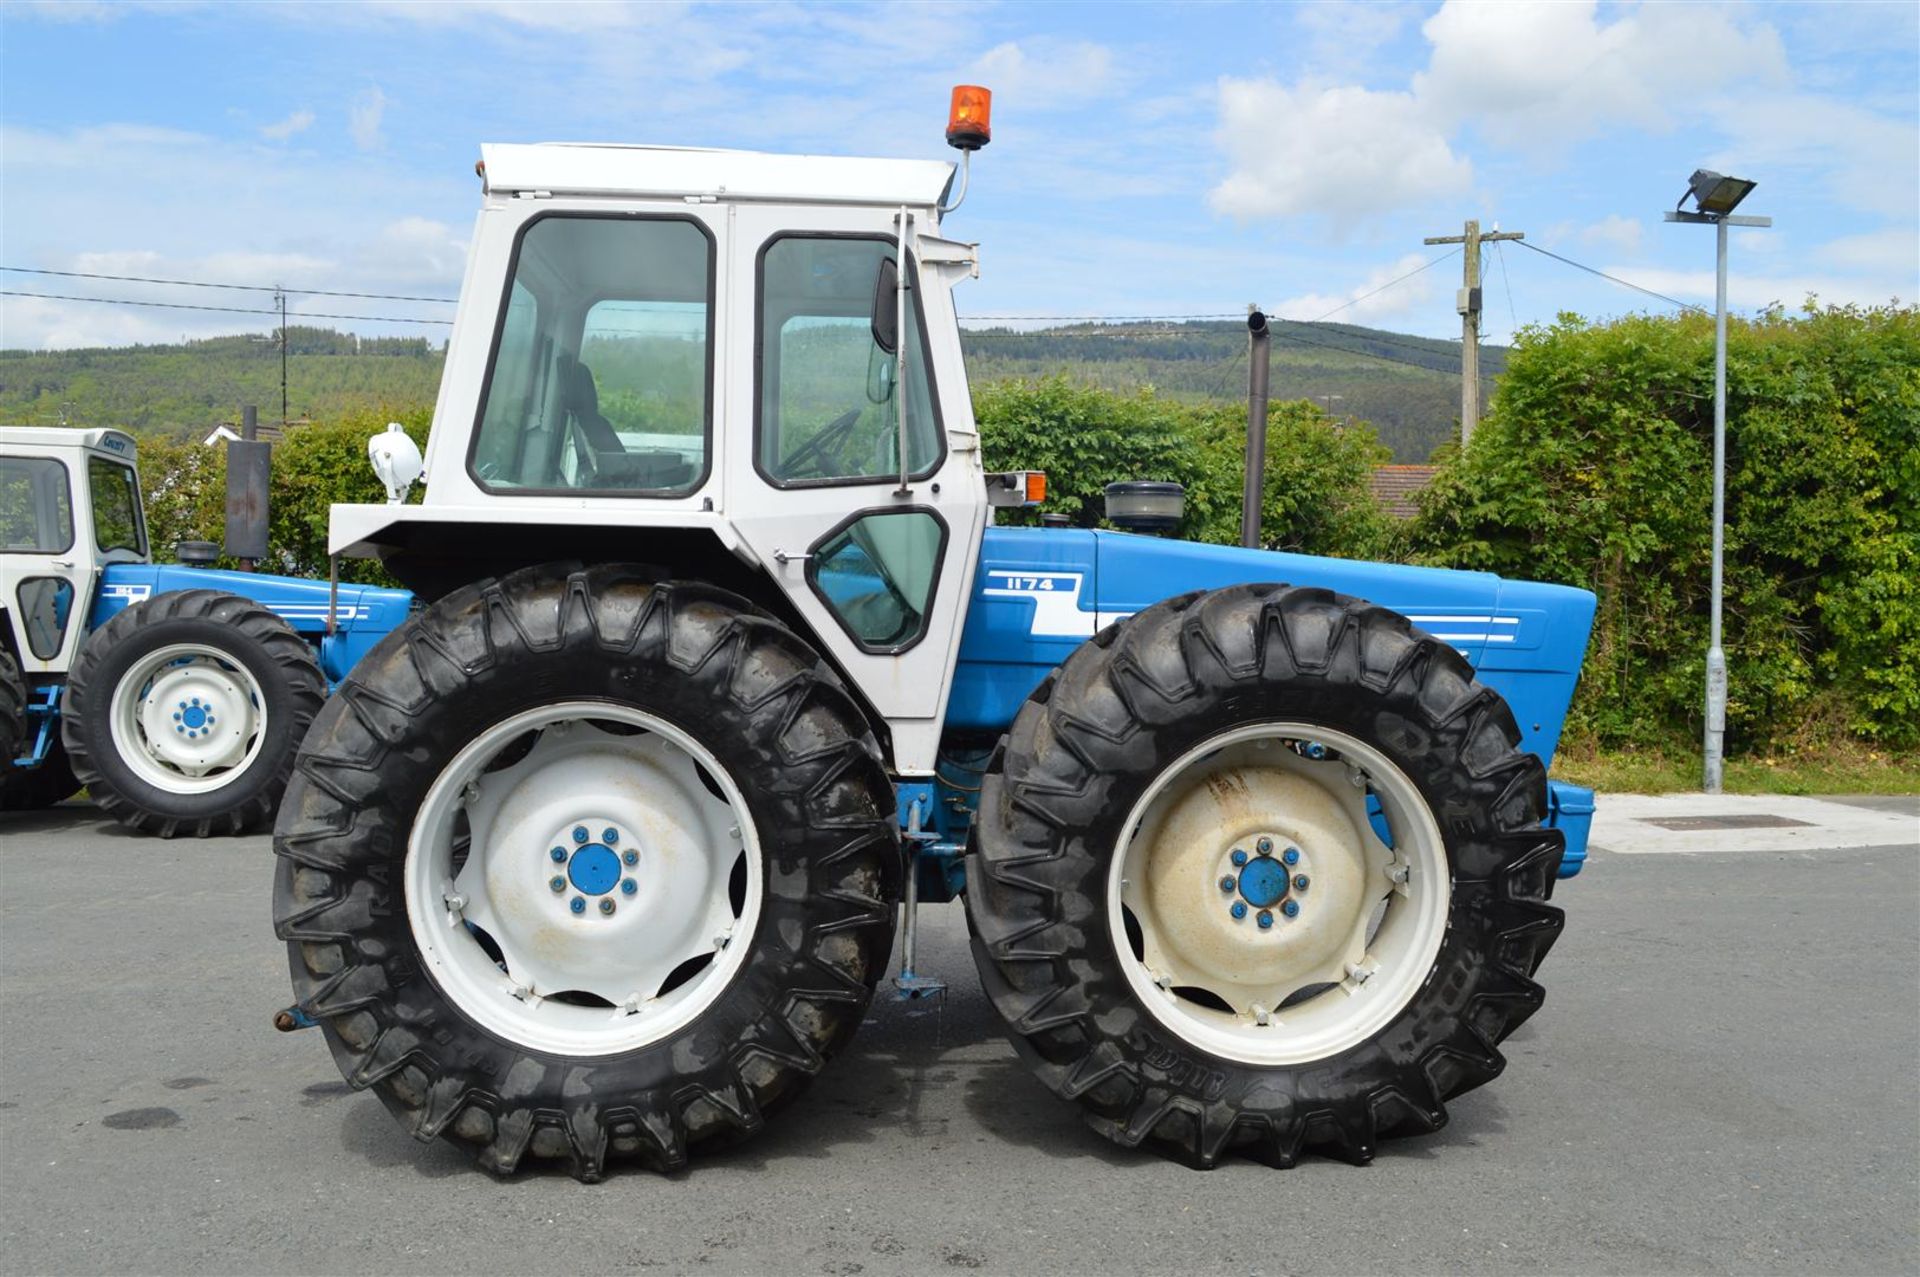 1979 COUNTY 1174 4wd 6 cylinder TRACTOR Reg No. 79MN145 Serial No. B95662 Production of the 1174